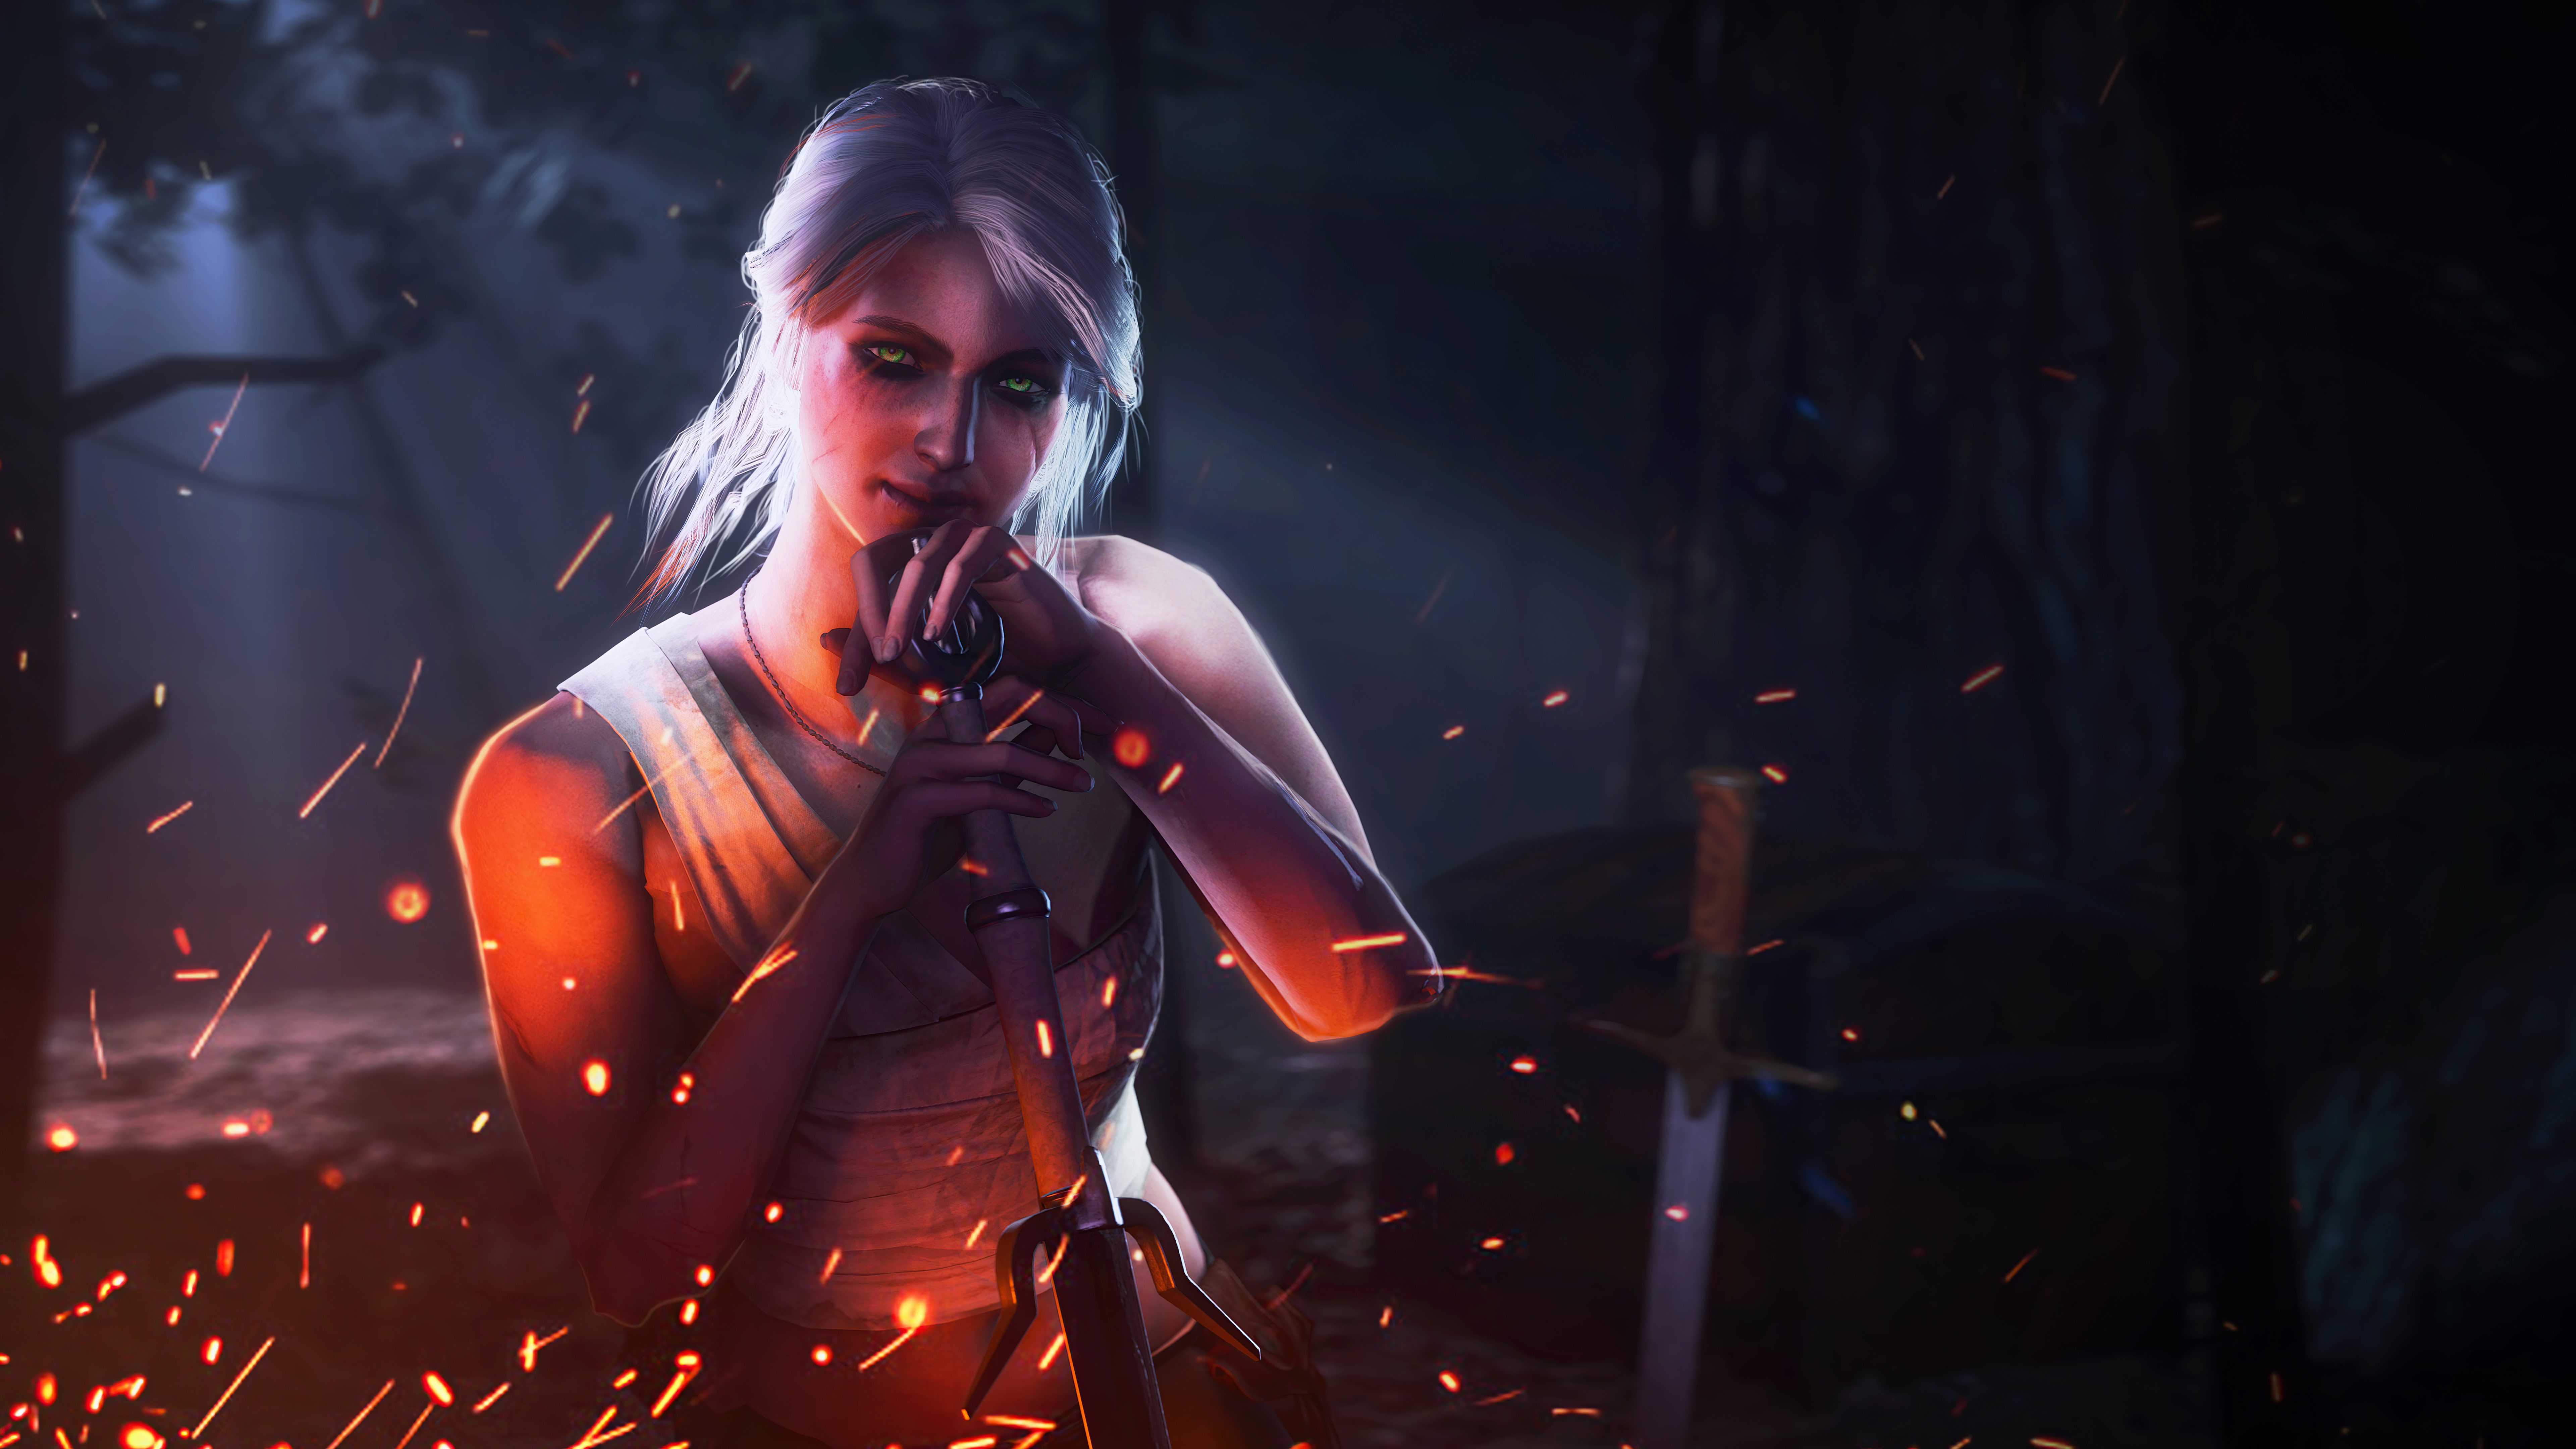 The Witcher 3: Wild Hunt 8k Ultra HD Wallpaper by INGYUARTS